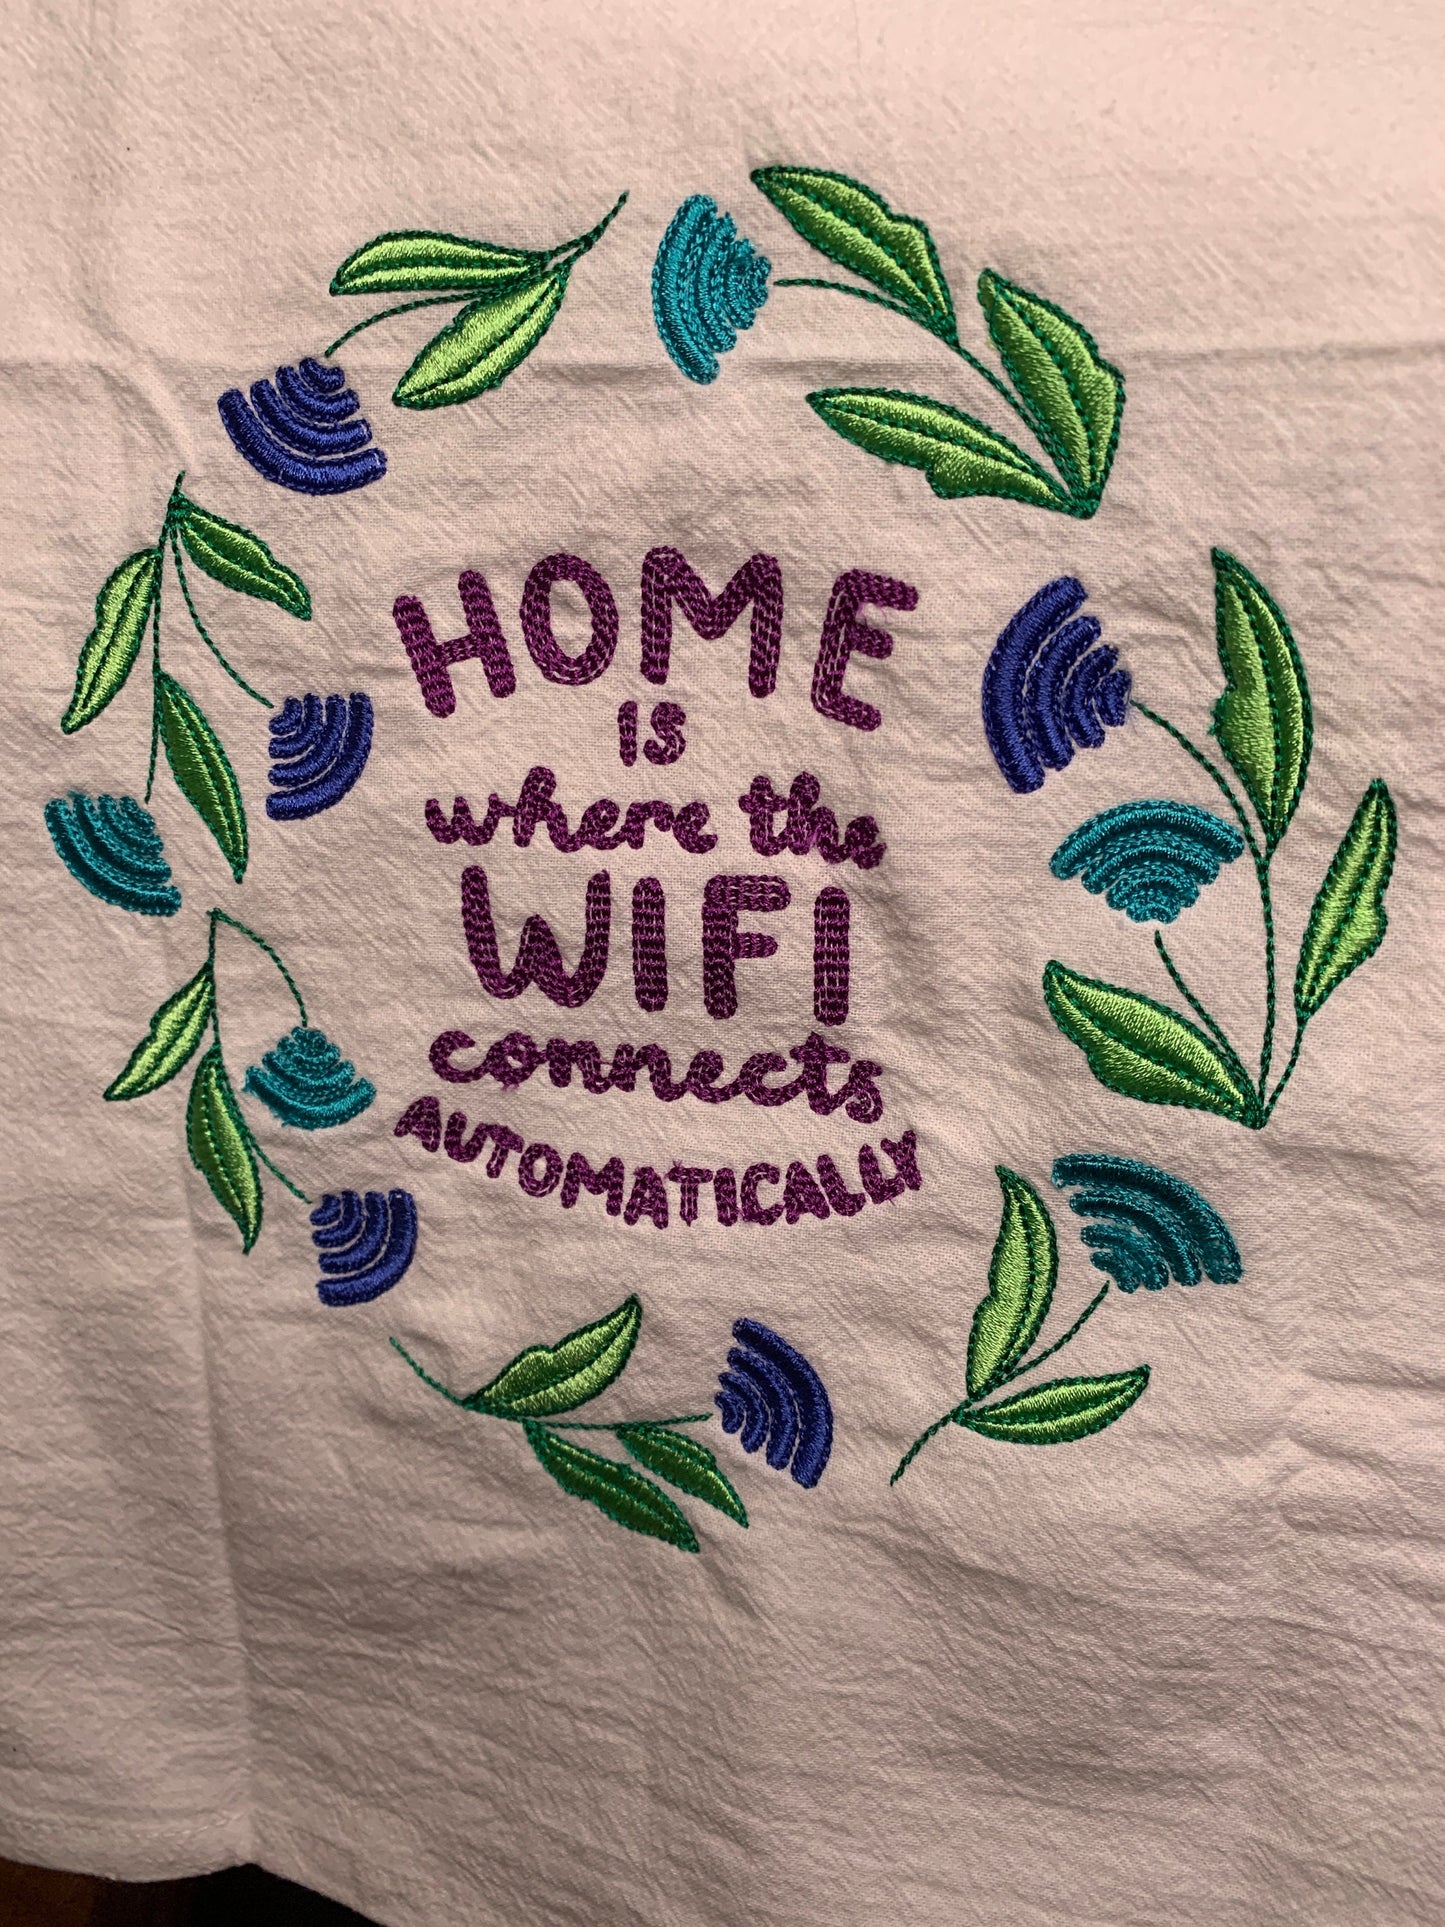 Embroidered Tea Towel "Home is Where The Wifi Connects Automatically"